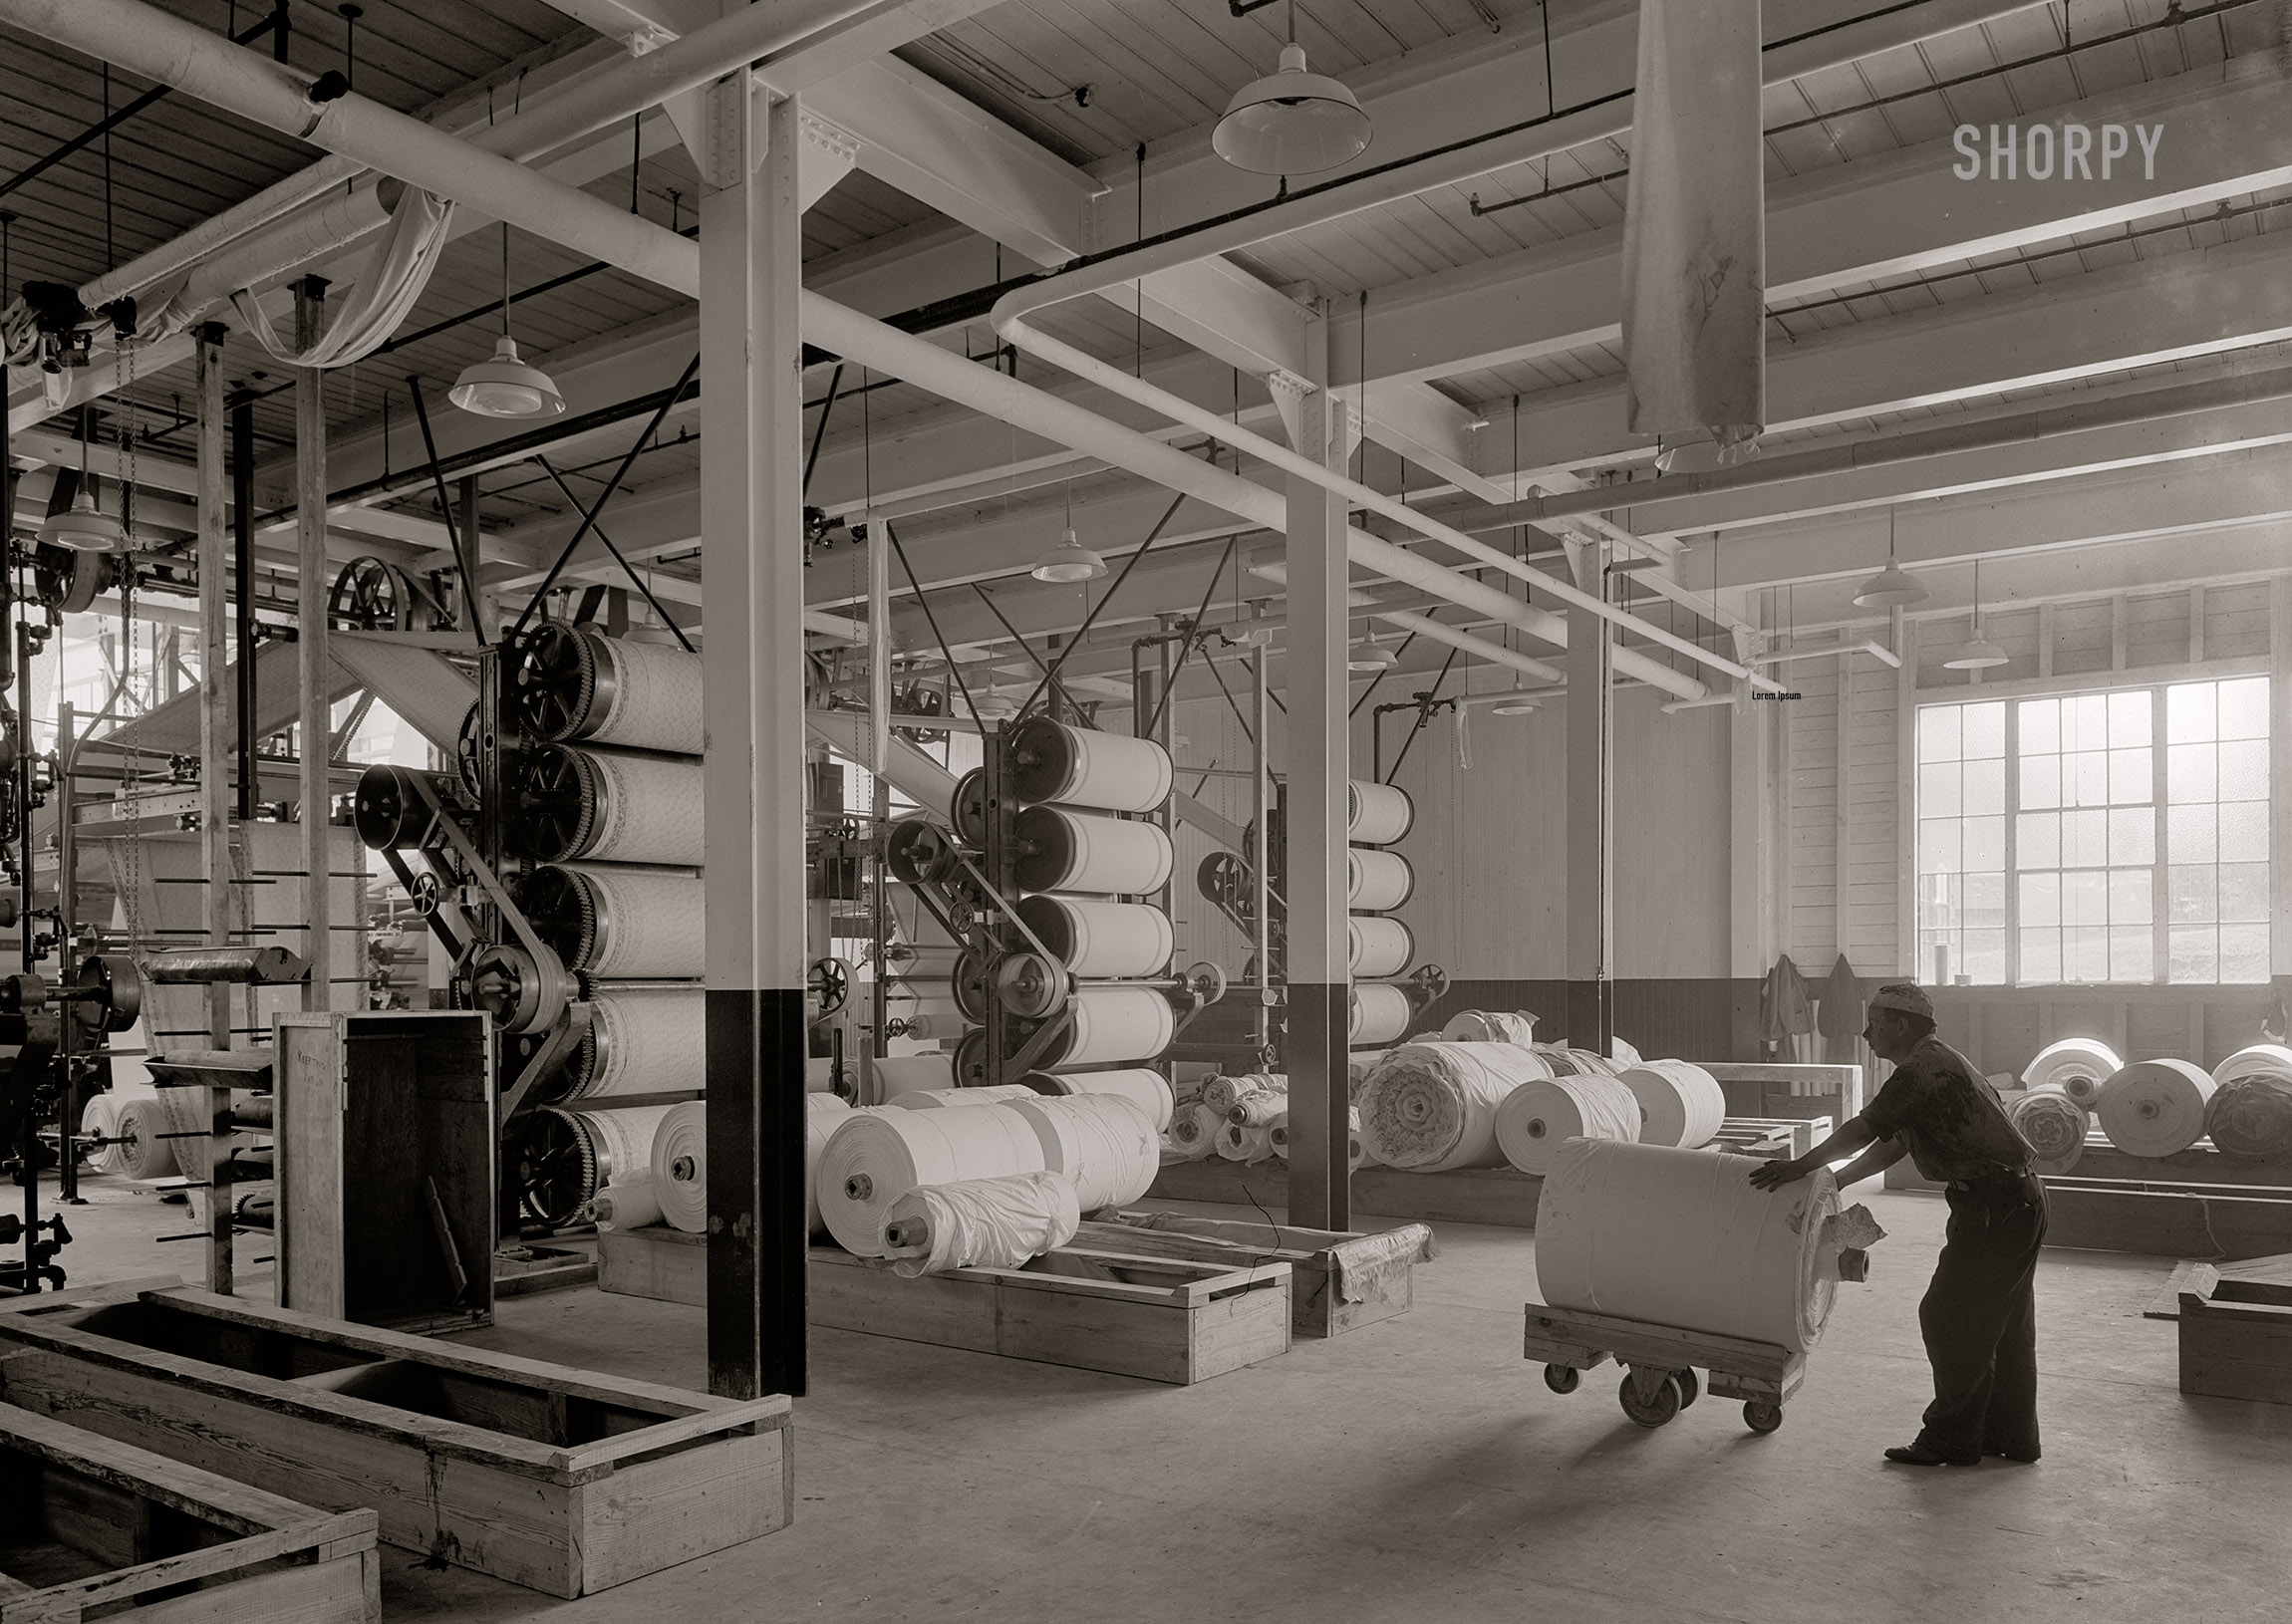 April 22, 1932. "Ware Shoals, South Carolina. Cotton cloth printing machine from rear." 5x7 inch acetate negative by Gottscho-Schleisner. View full size.